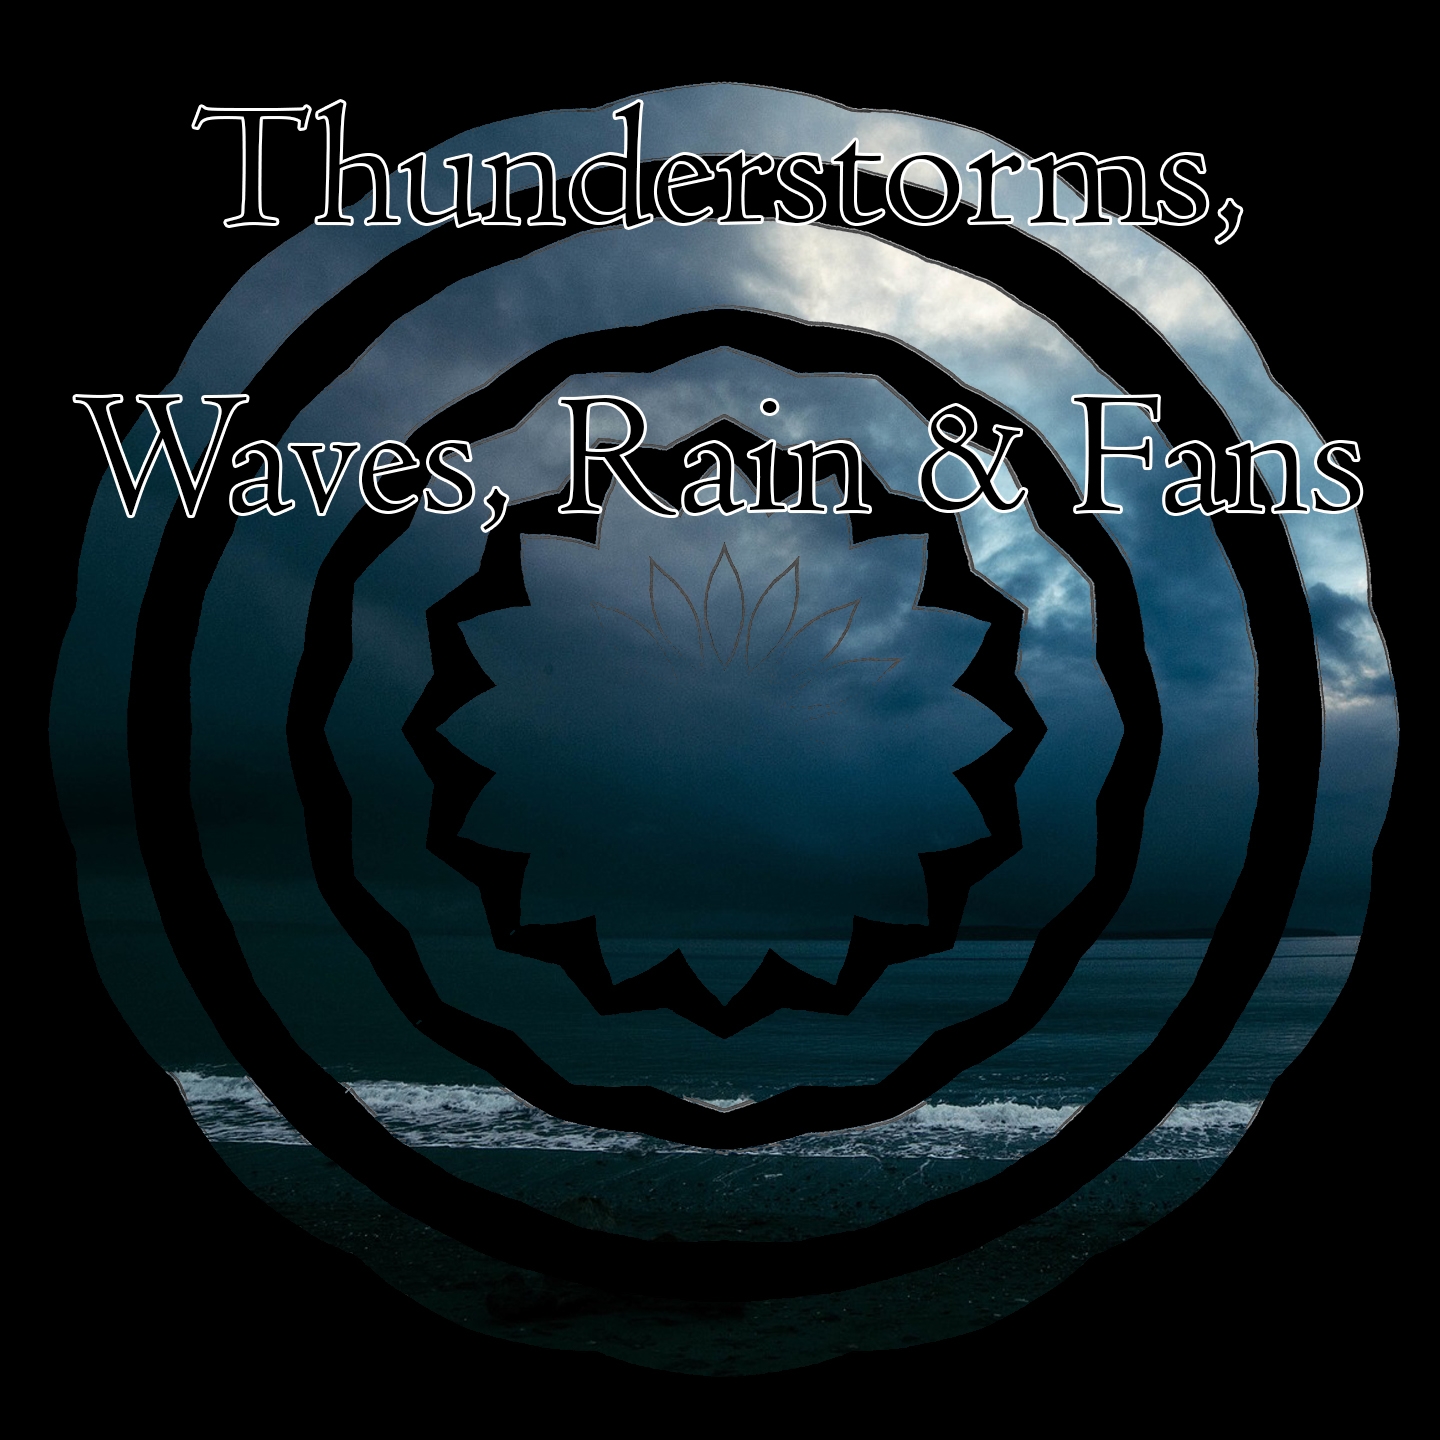 Thunderstorms, Waves, Rain & Fans